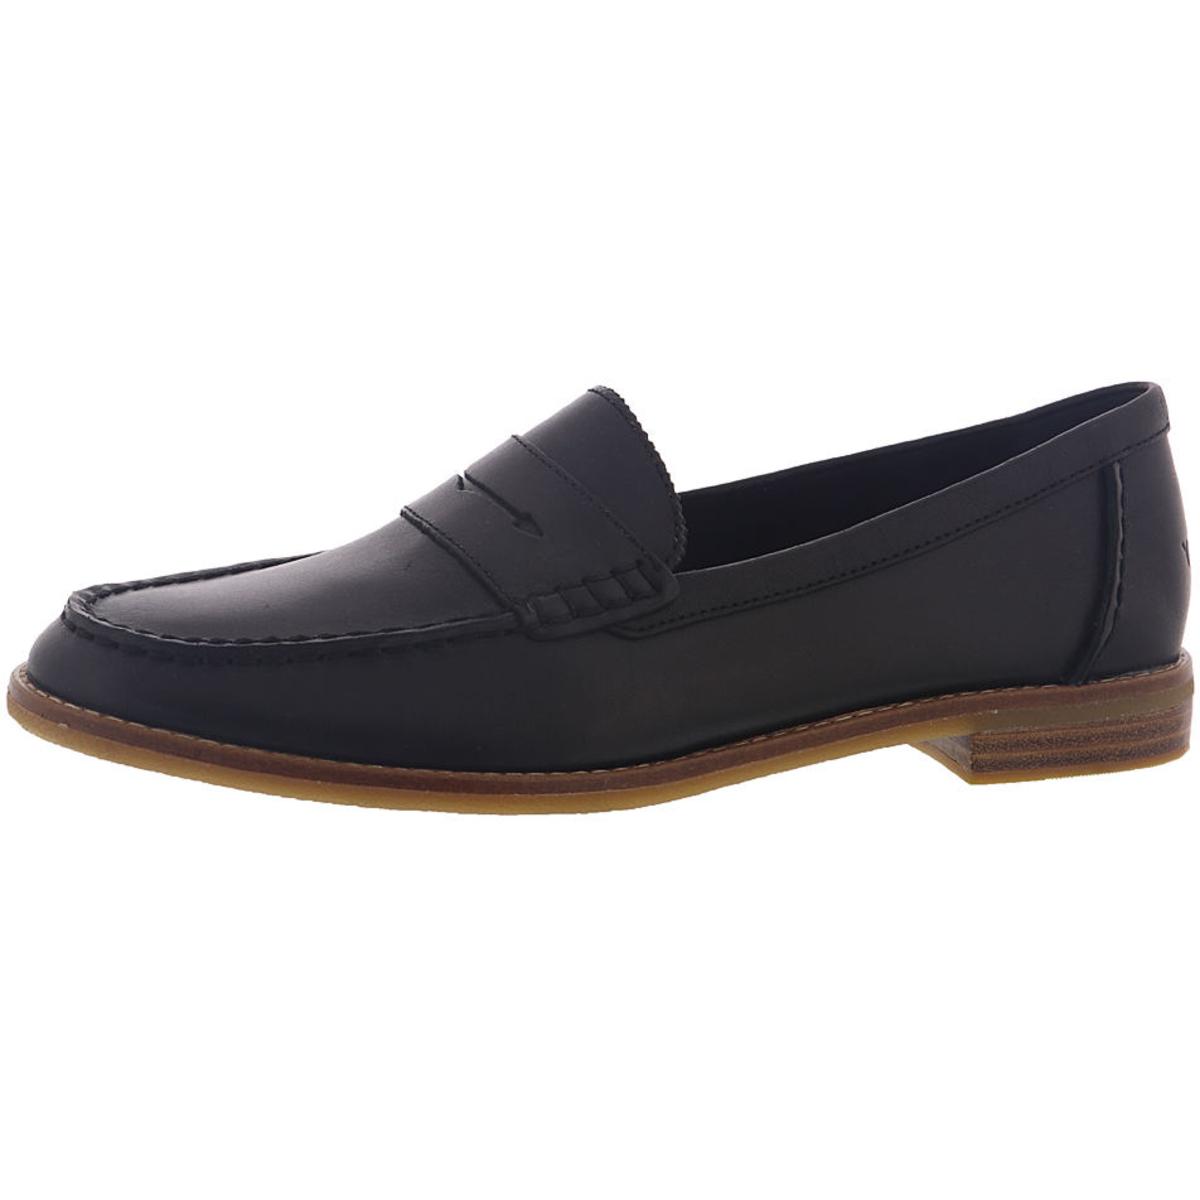 Sperry Womens Seaport Black Penny Loafers Shoes 8.5 Medium (B,M) BHFO ...